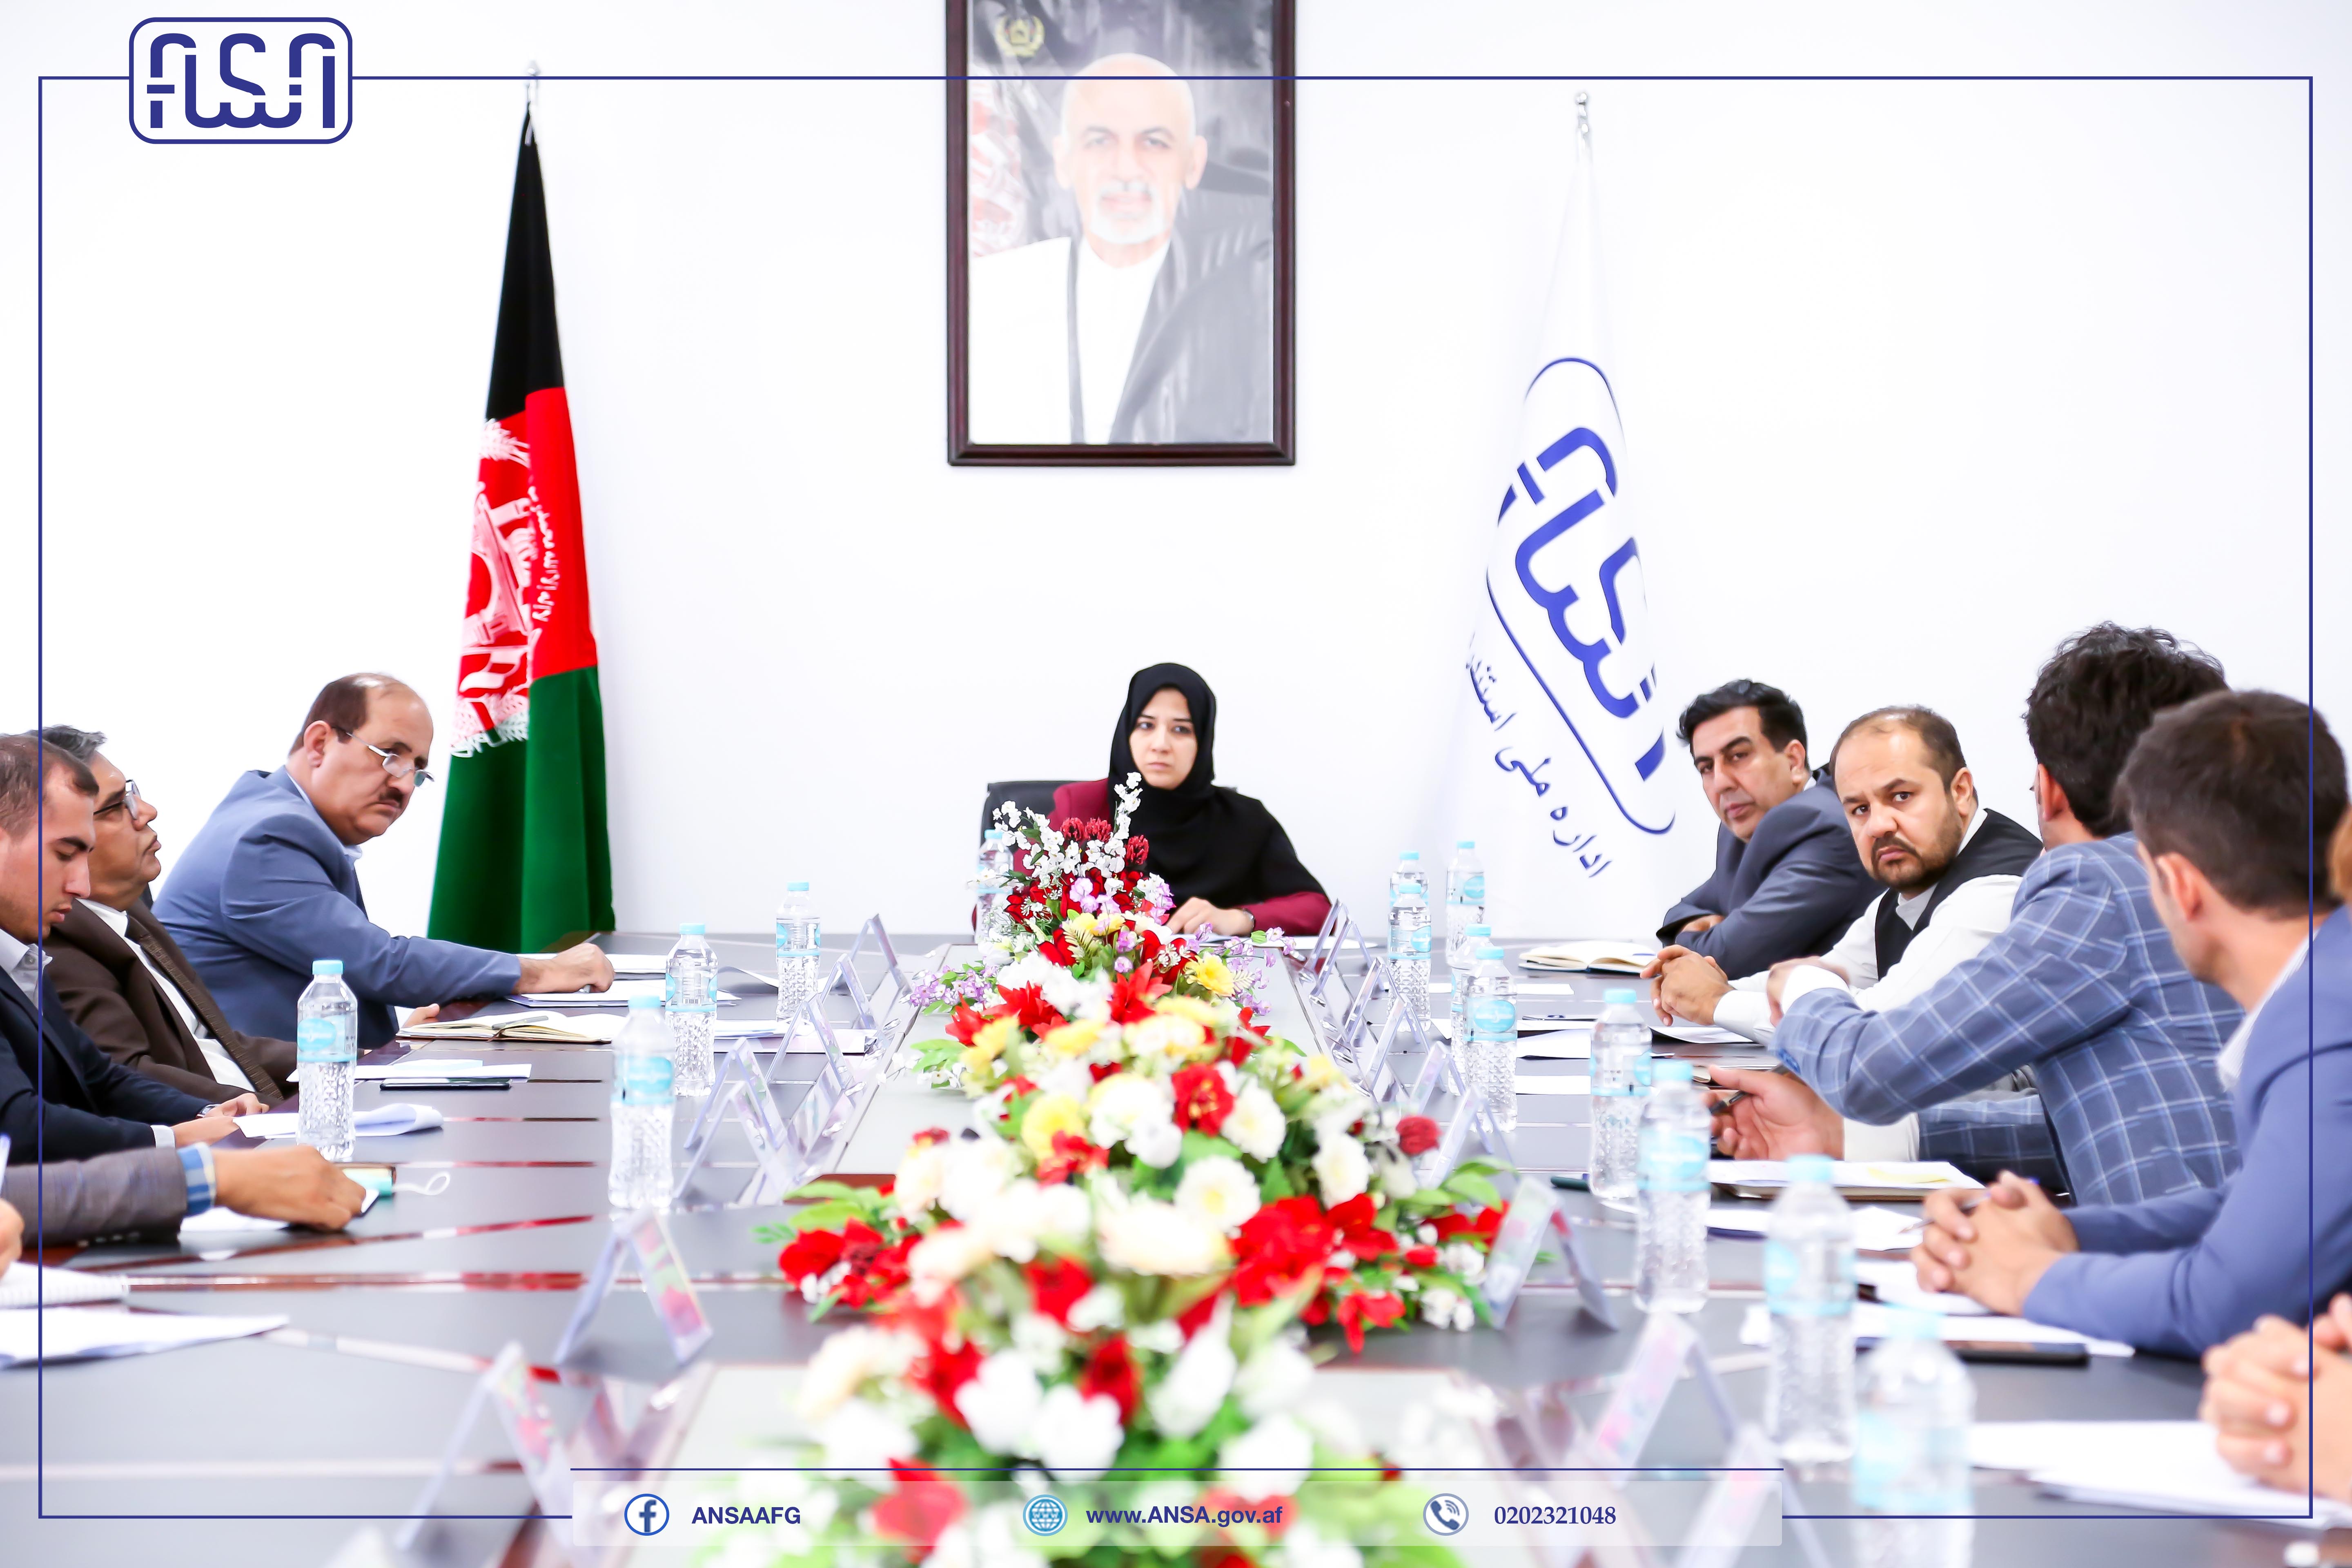 A meeting of the leadership board of the National Standards Authority was held. 